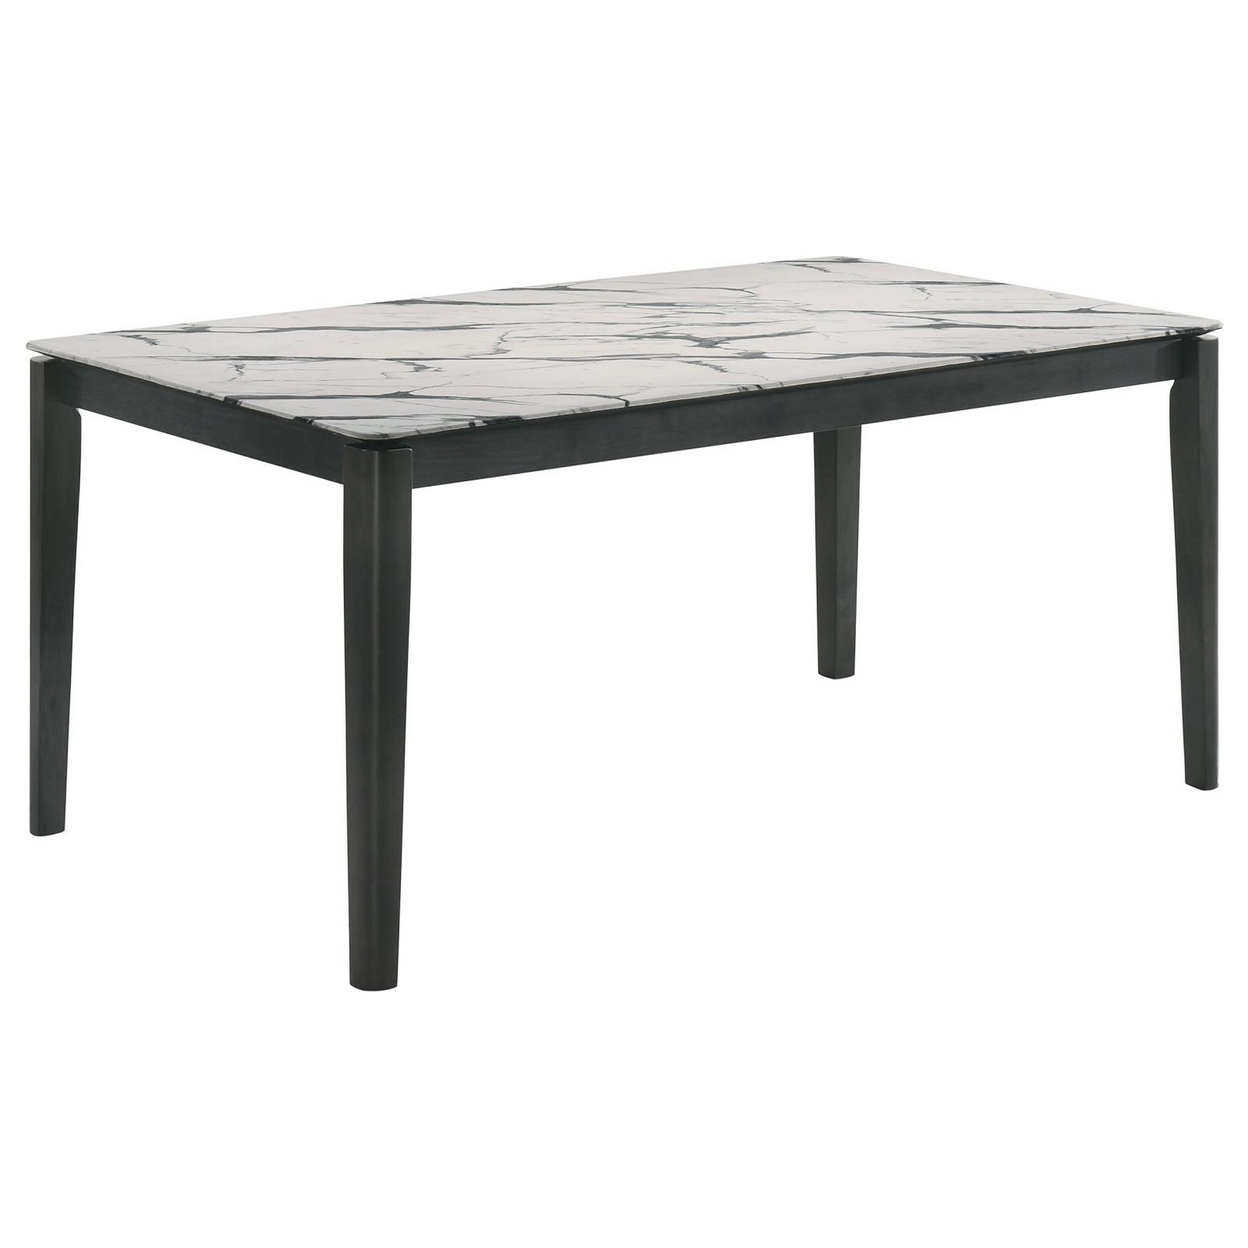 Abi 63 Inch Dining Table, 6 Seater, Beveled Top, Faux Marble Finish, Gray -Saltoro Sherpi